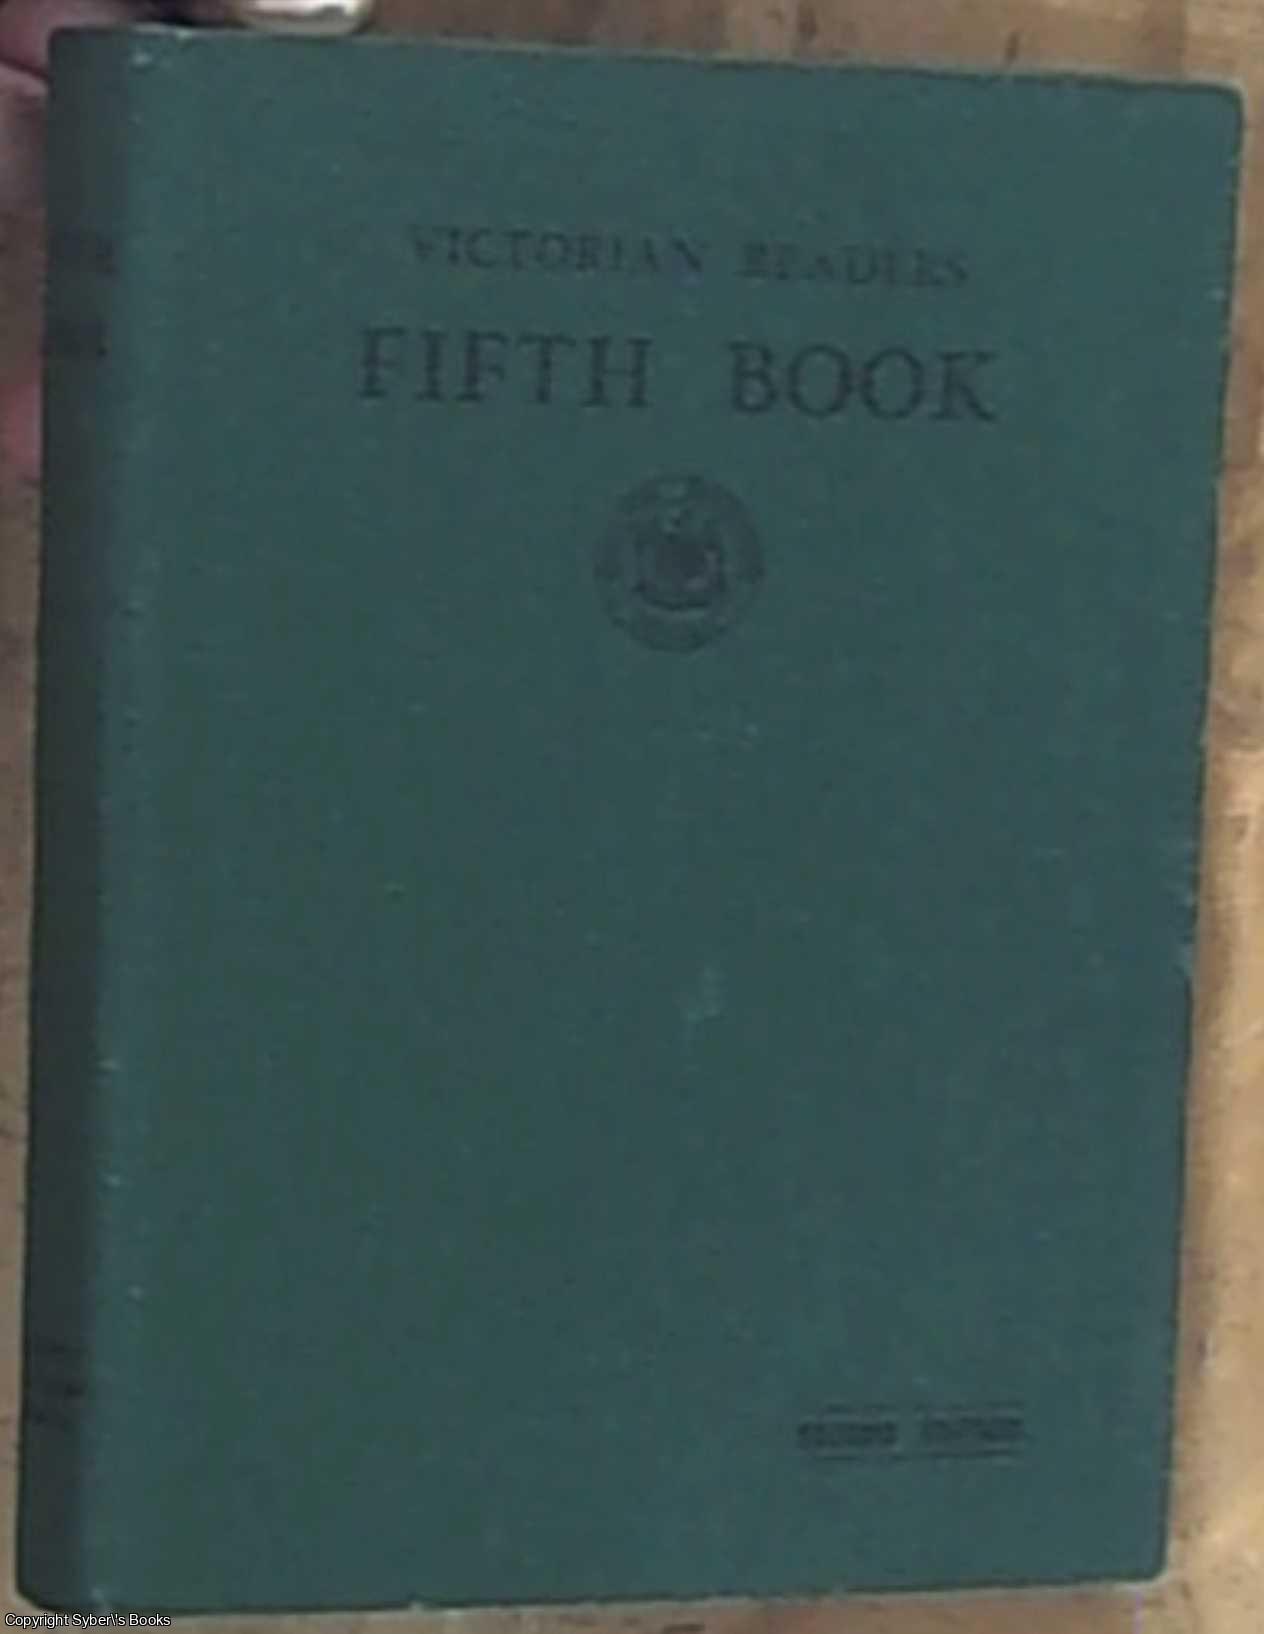 not credited - The Victorian Readers: Fifth Book